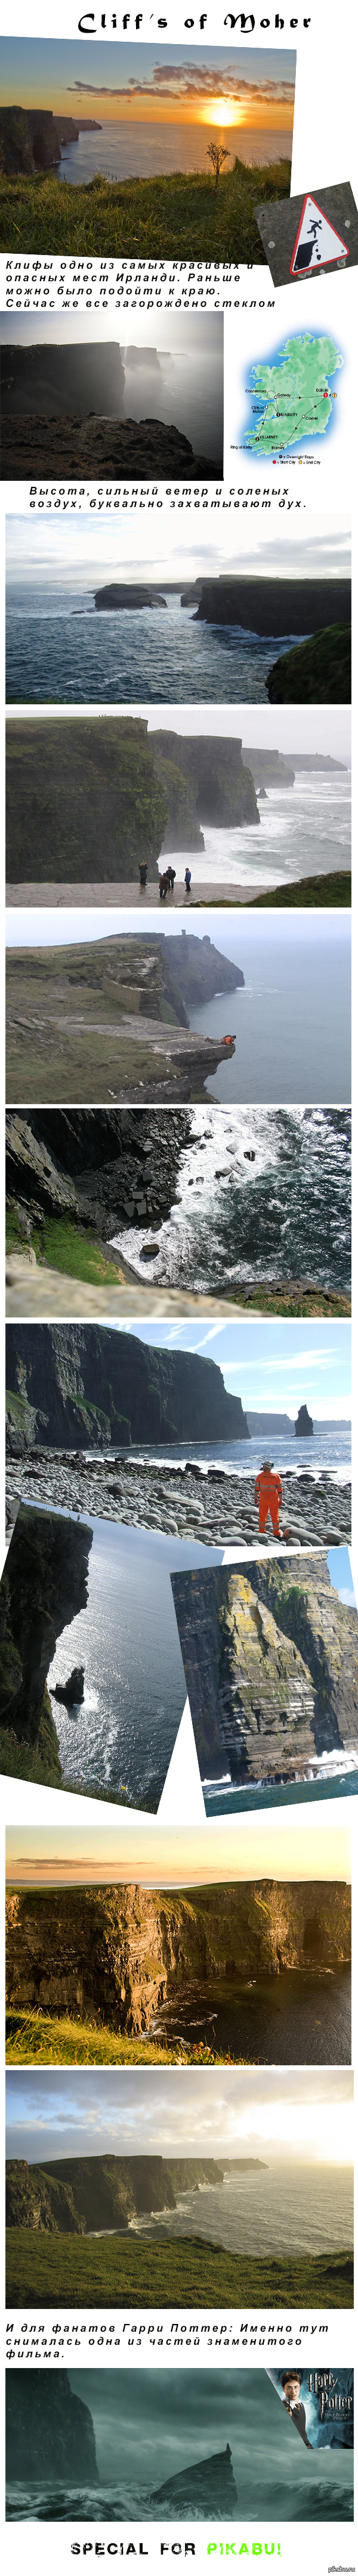 Cliff's of Moher -  .  1.       .